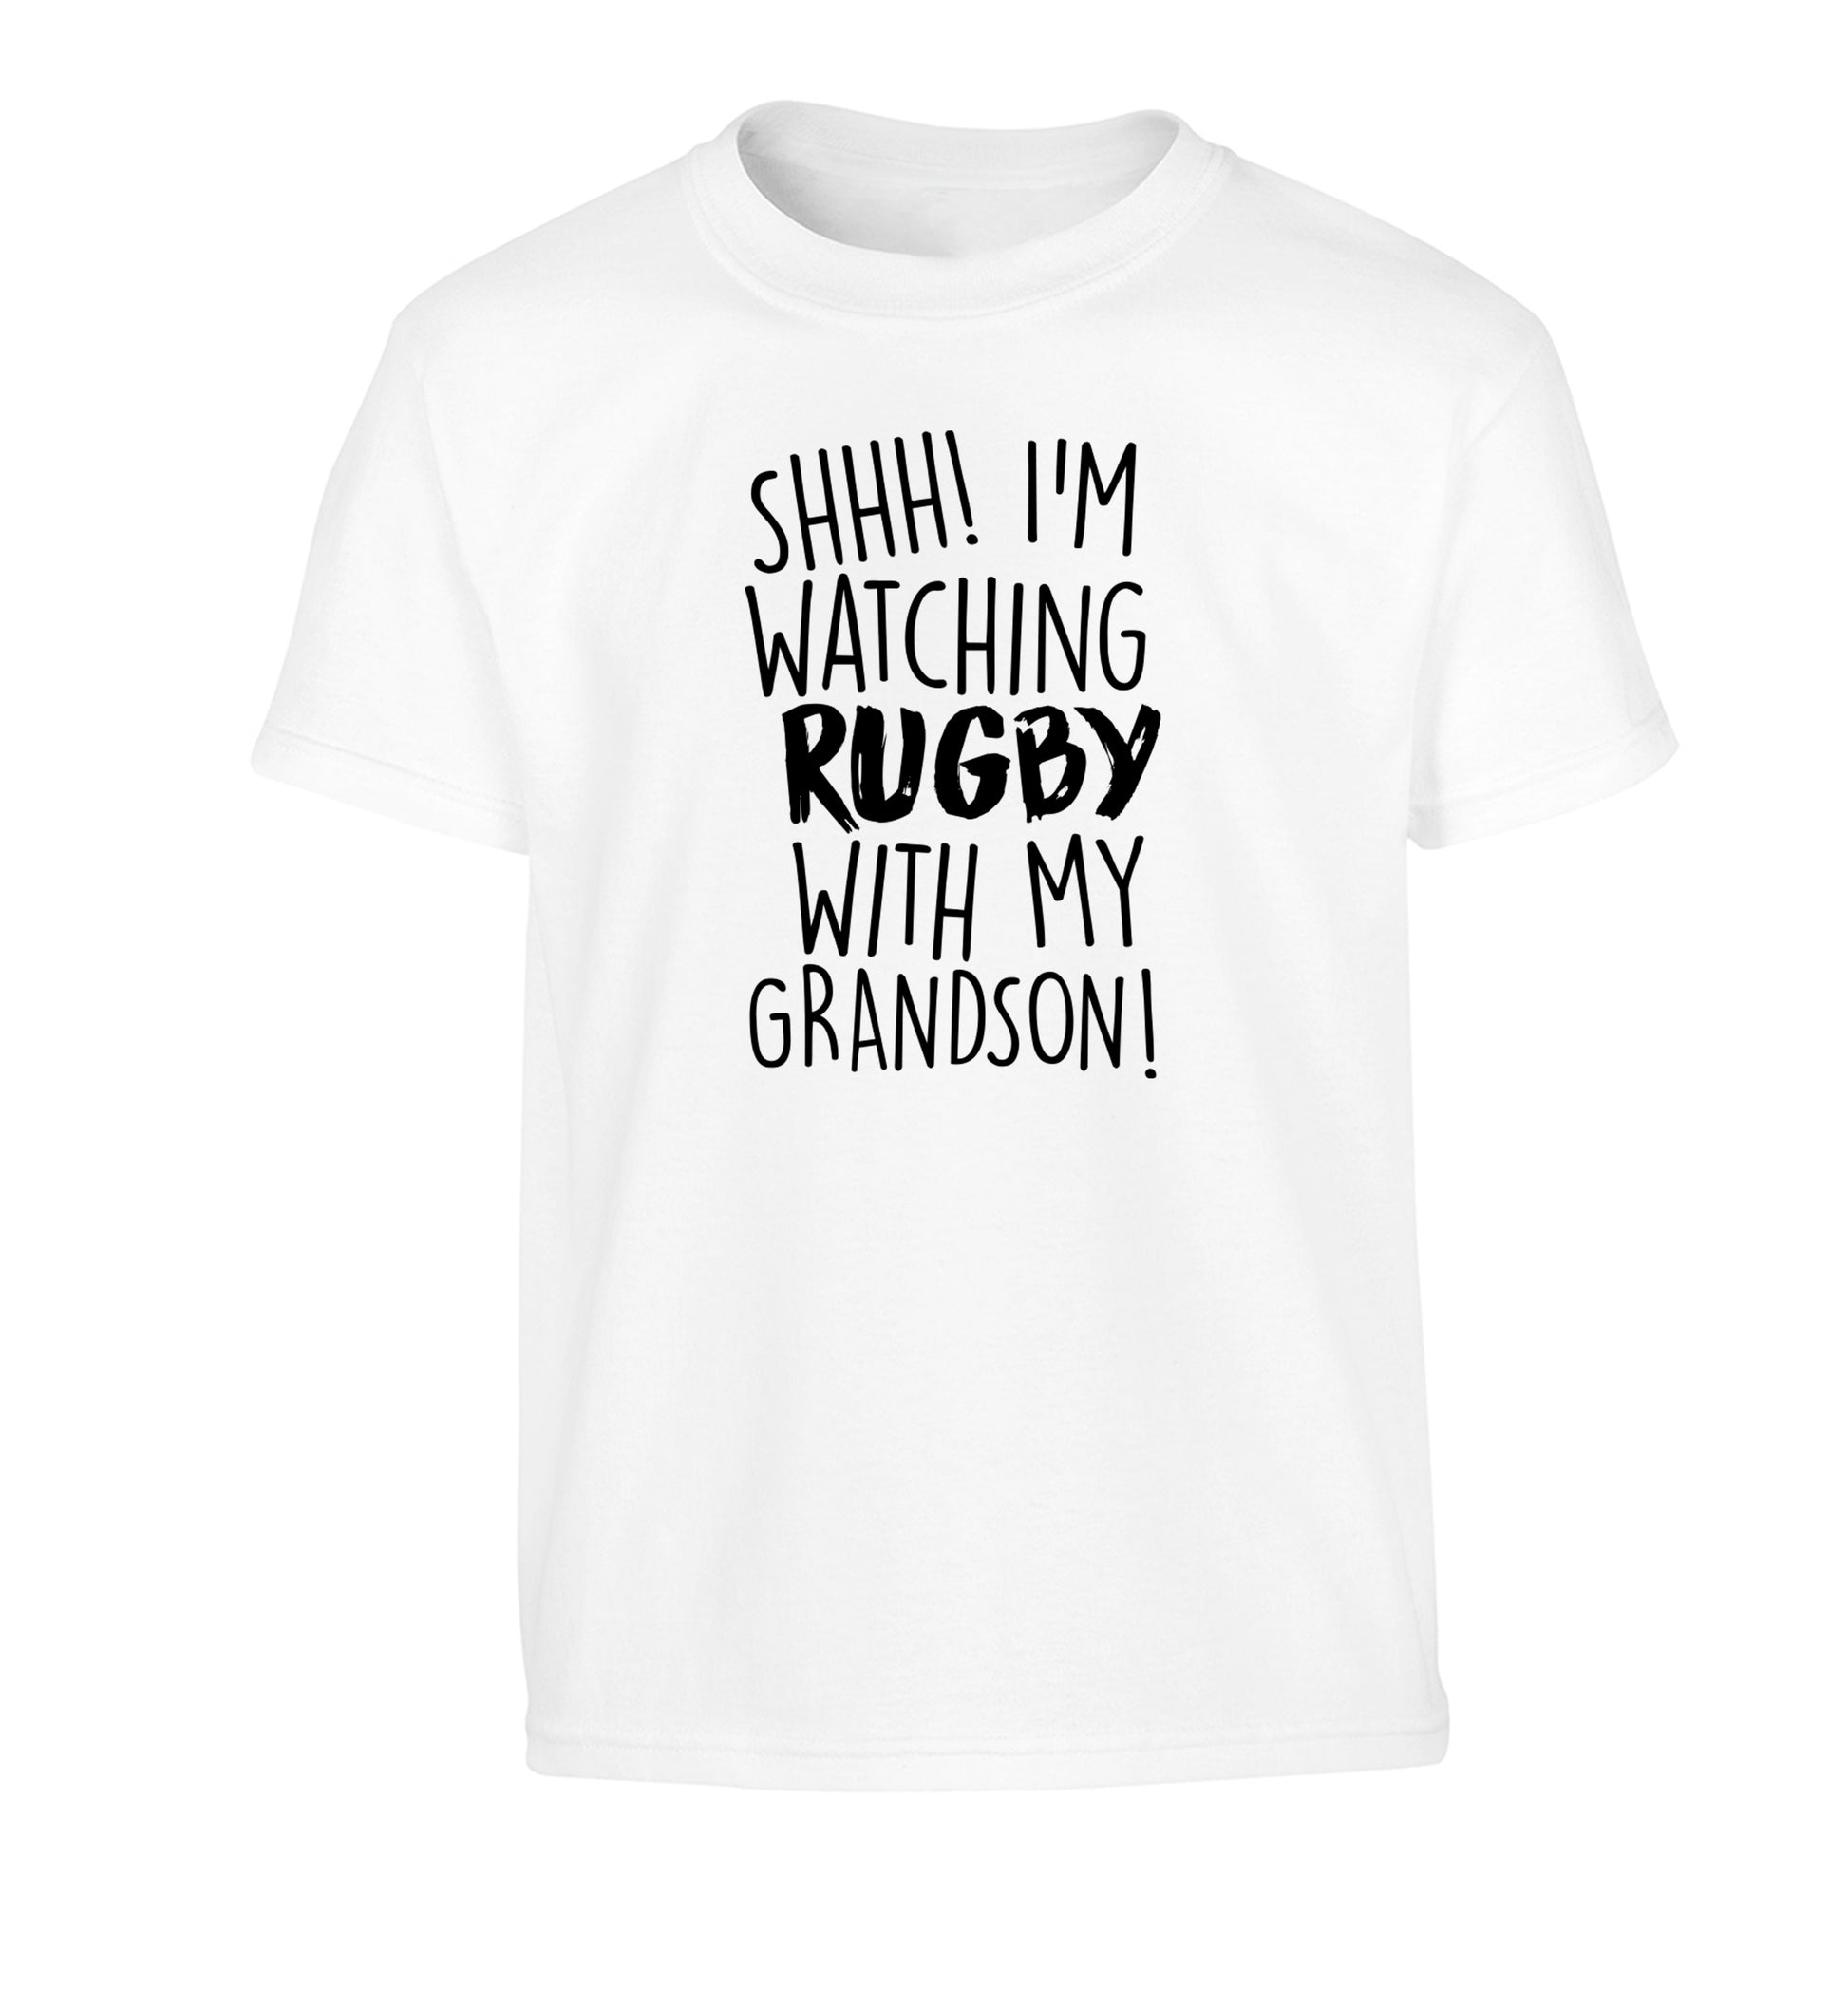 Shh I'm watching rugby with my grandson Children's white Tshirt 12-13 Years